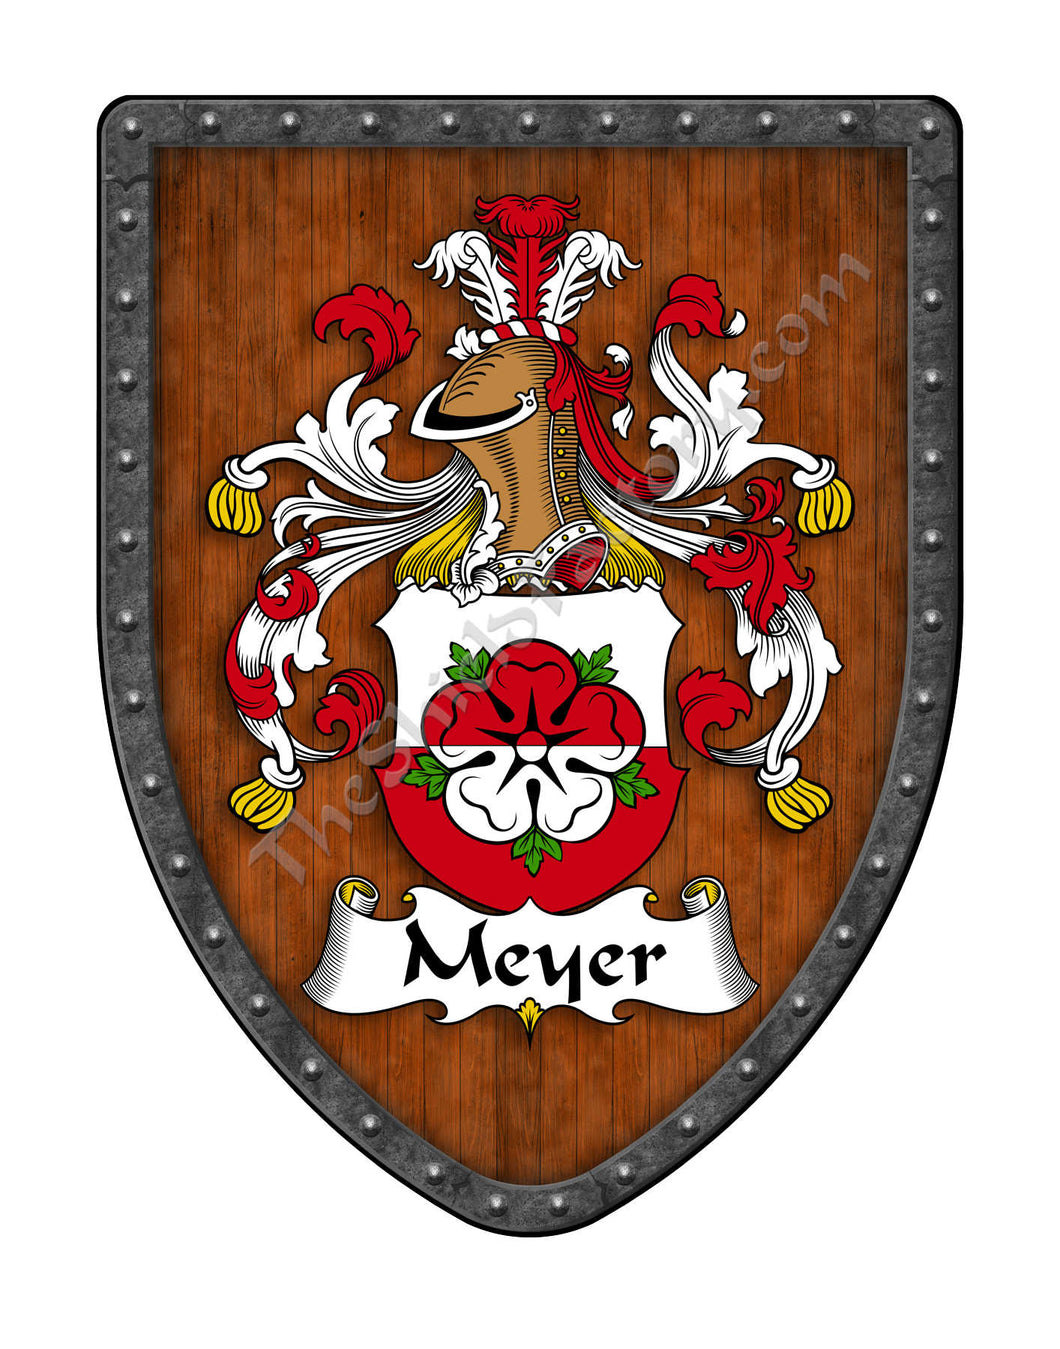 Meyer Coat of Arms